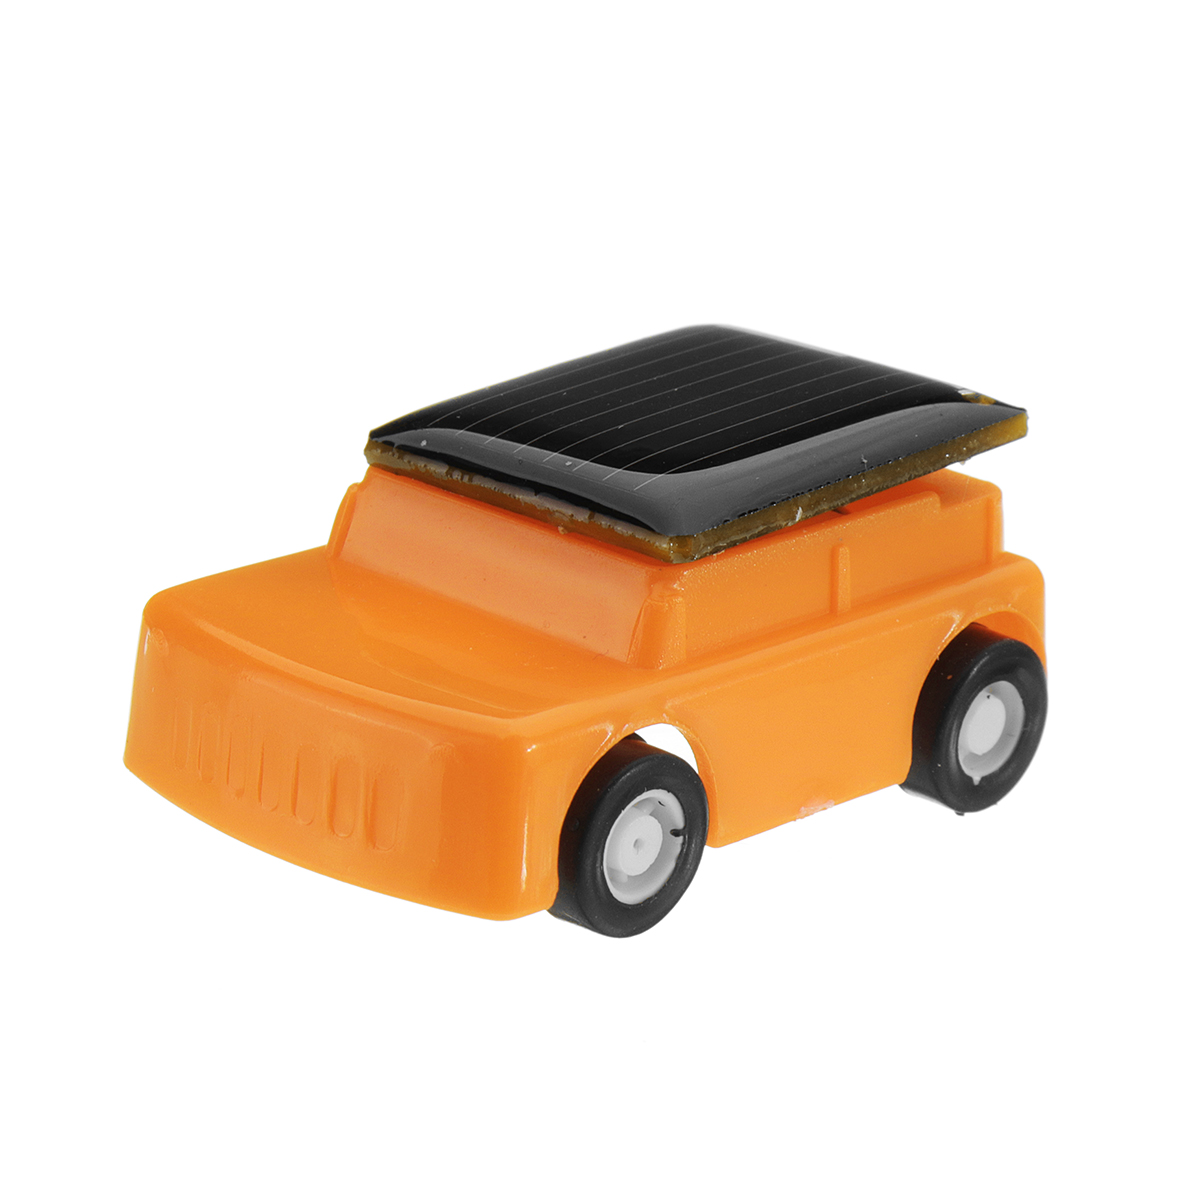 Solar-Powered-Toy-Mini-Car-Kids-Gift-Super-Cute-Creative-ABS-No-toxic-Material-Children-Favorate-1315990-3